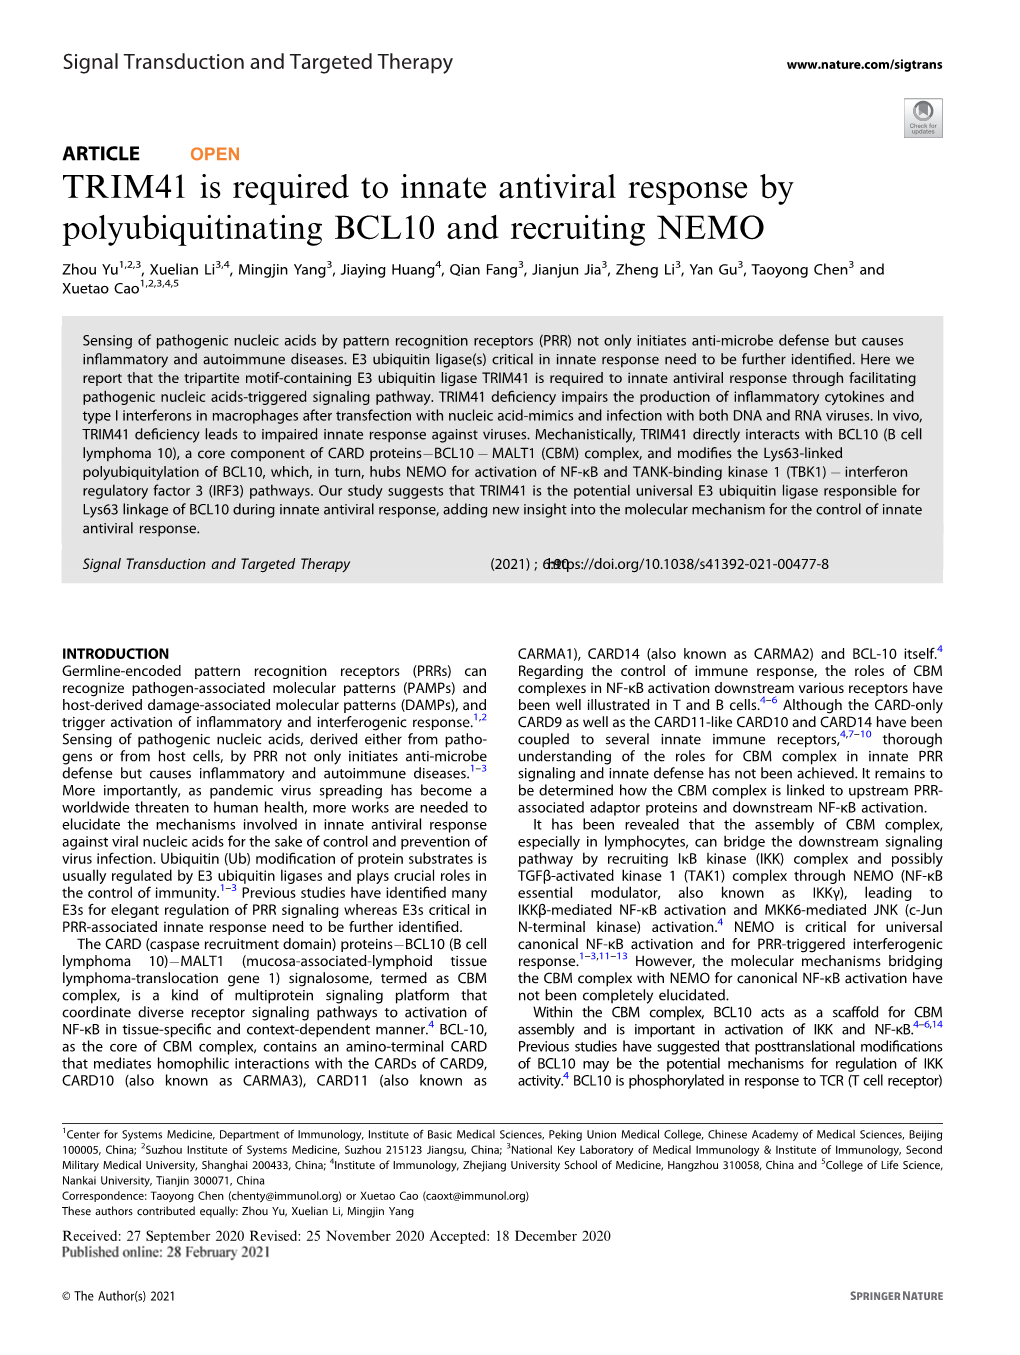 TRIM41 Is Required to Innate Antiviral Response by Polyubiquitinating BCL10 and Recruiting NEMO